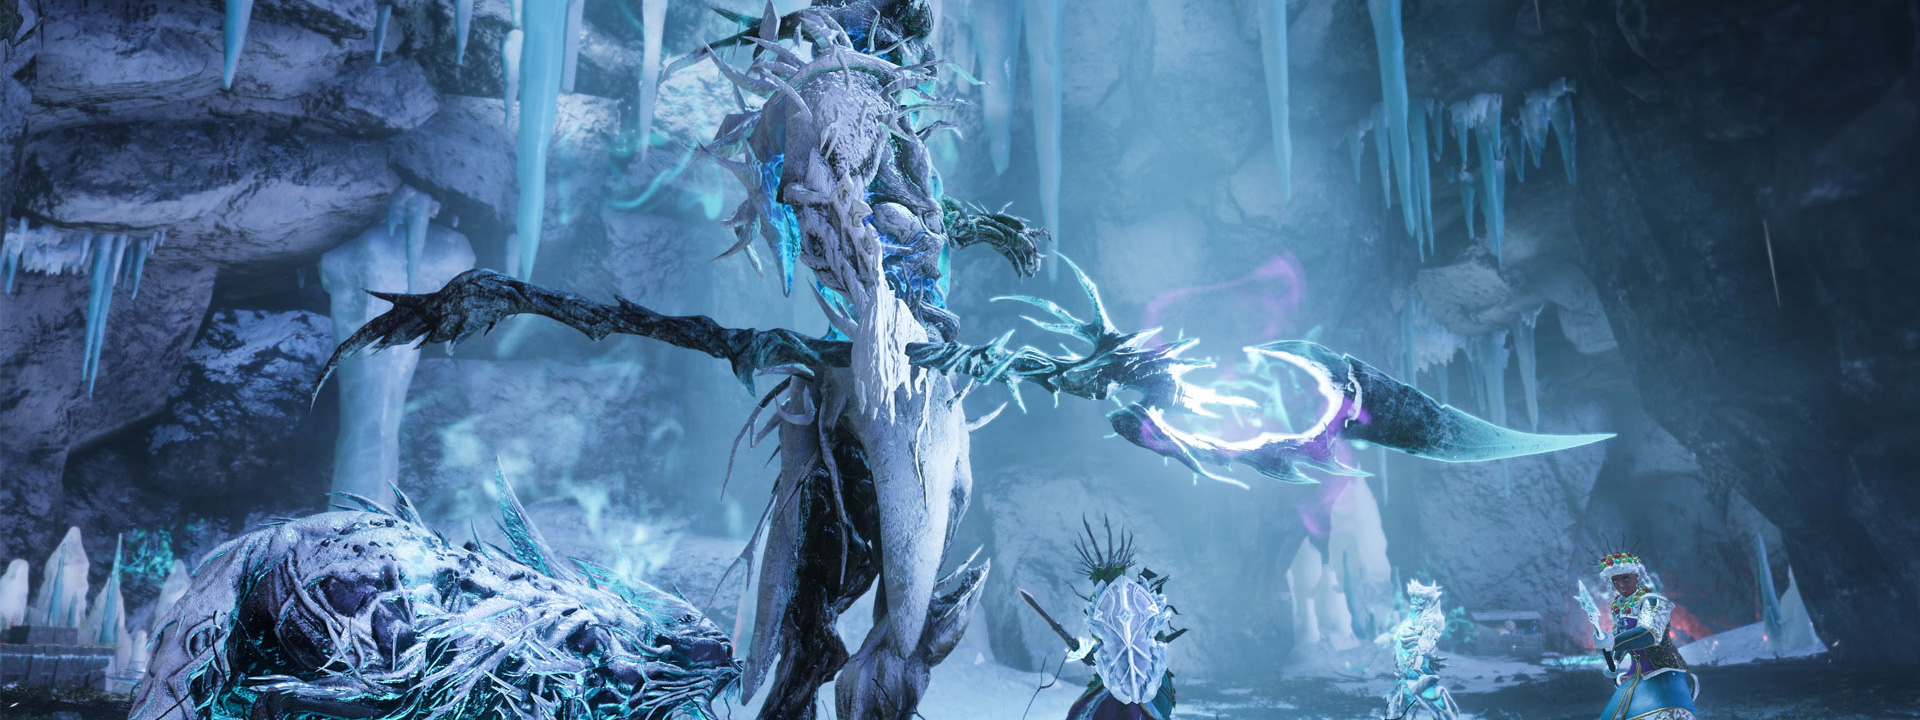 Several adventurers face off against wintry enemies in an icy cavern.